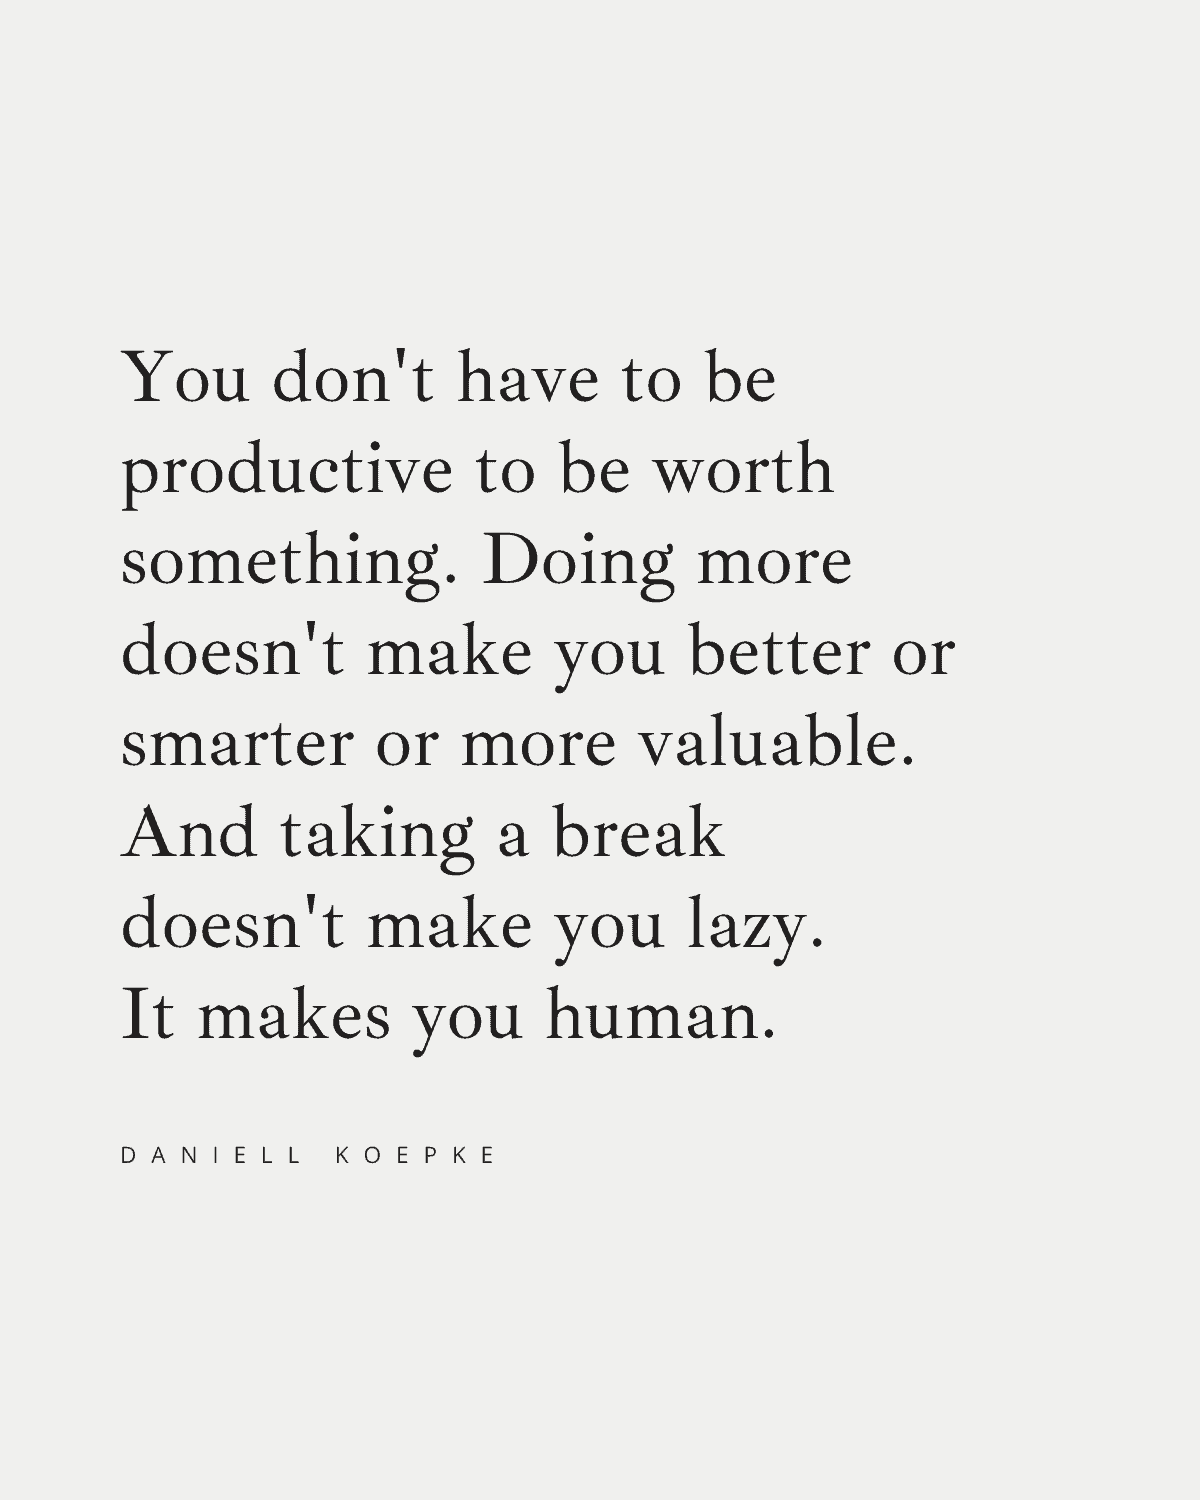 You don't have to be productive to be worth something. Doing more 
doesn't make you better or smarter or more valuable. And taking a break 
doesn't make you lazy. It makes you human. 